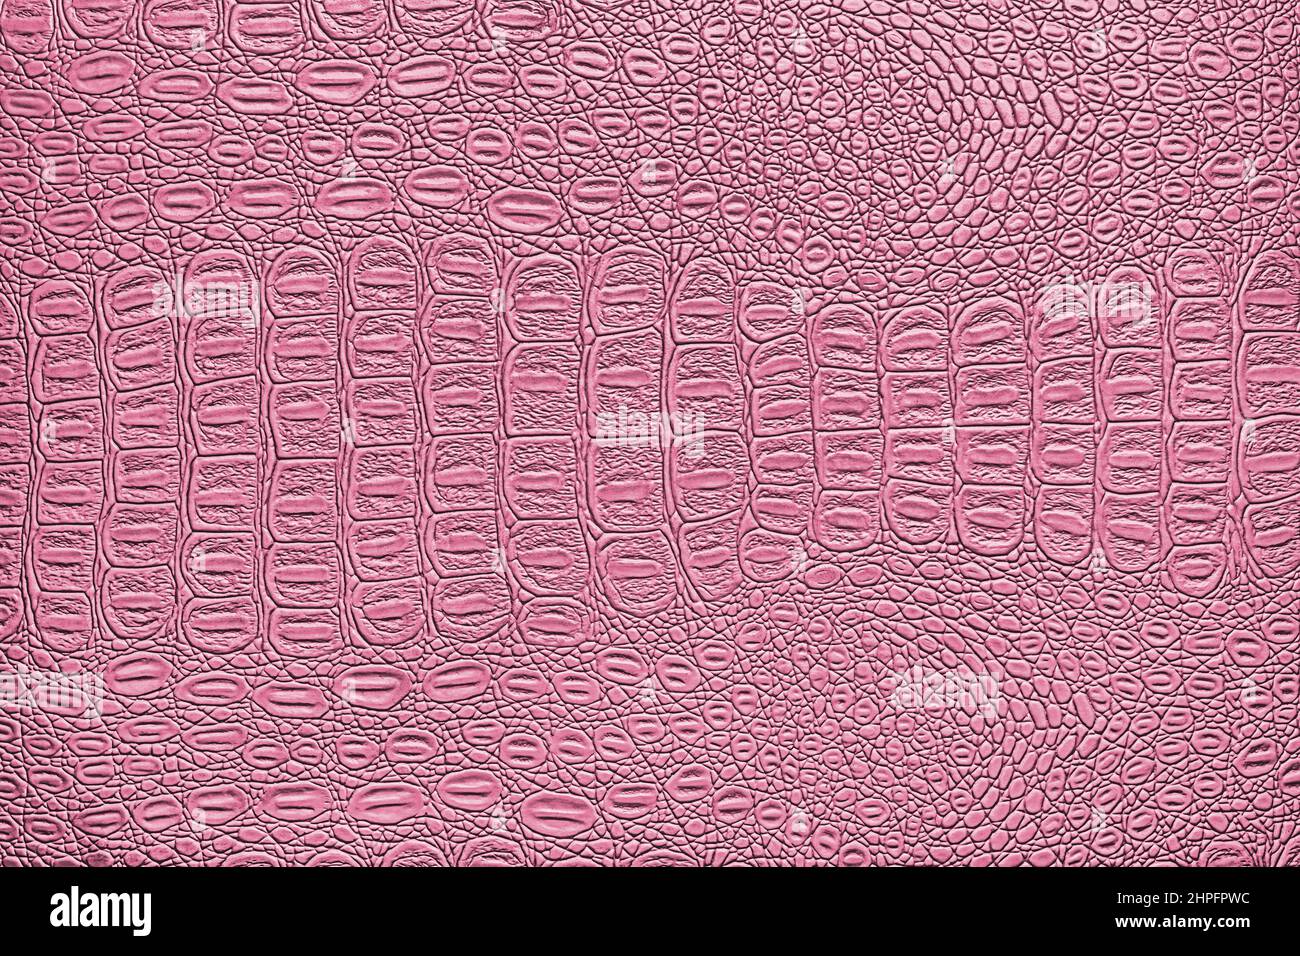 Pink crocodile leather texture. Abstract background for design Stock Photo  - Alamy